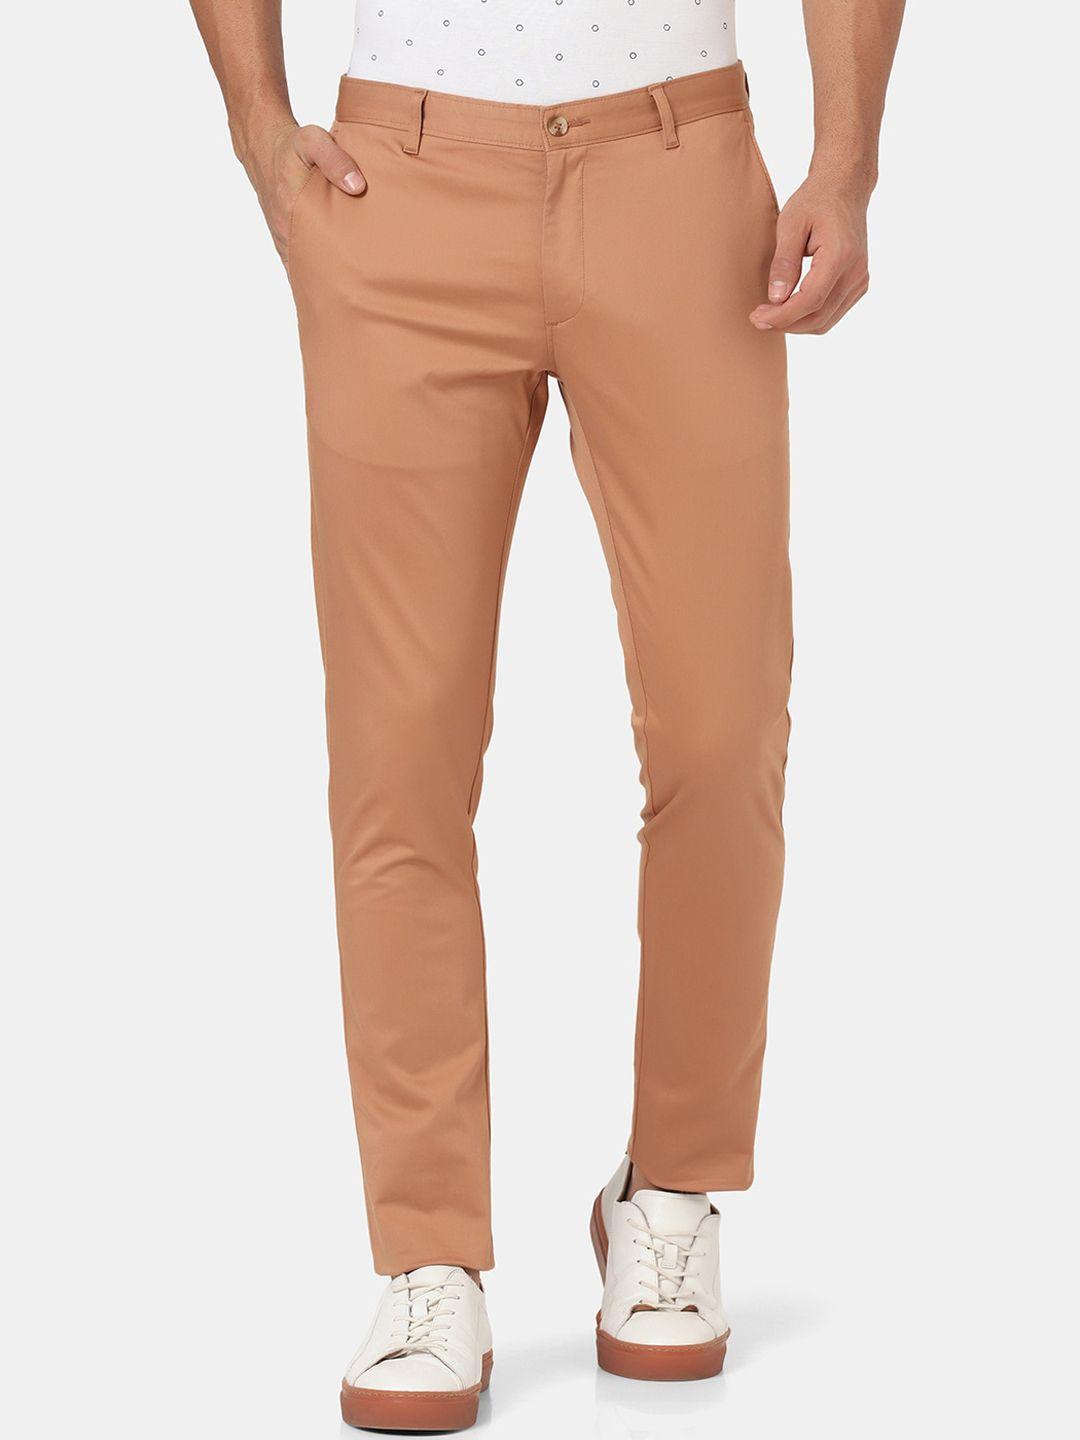 blackberrys-men-peach-coloured-slim-fit-low-rise-chinos-trousers